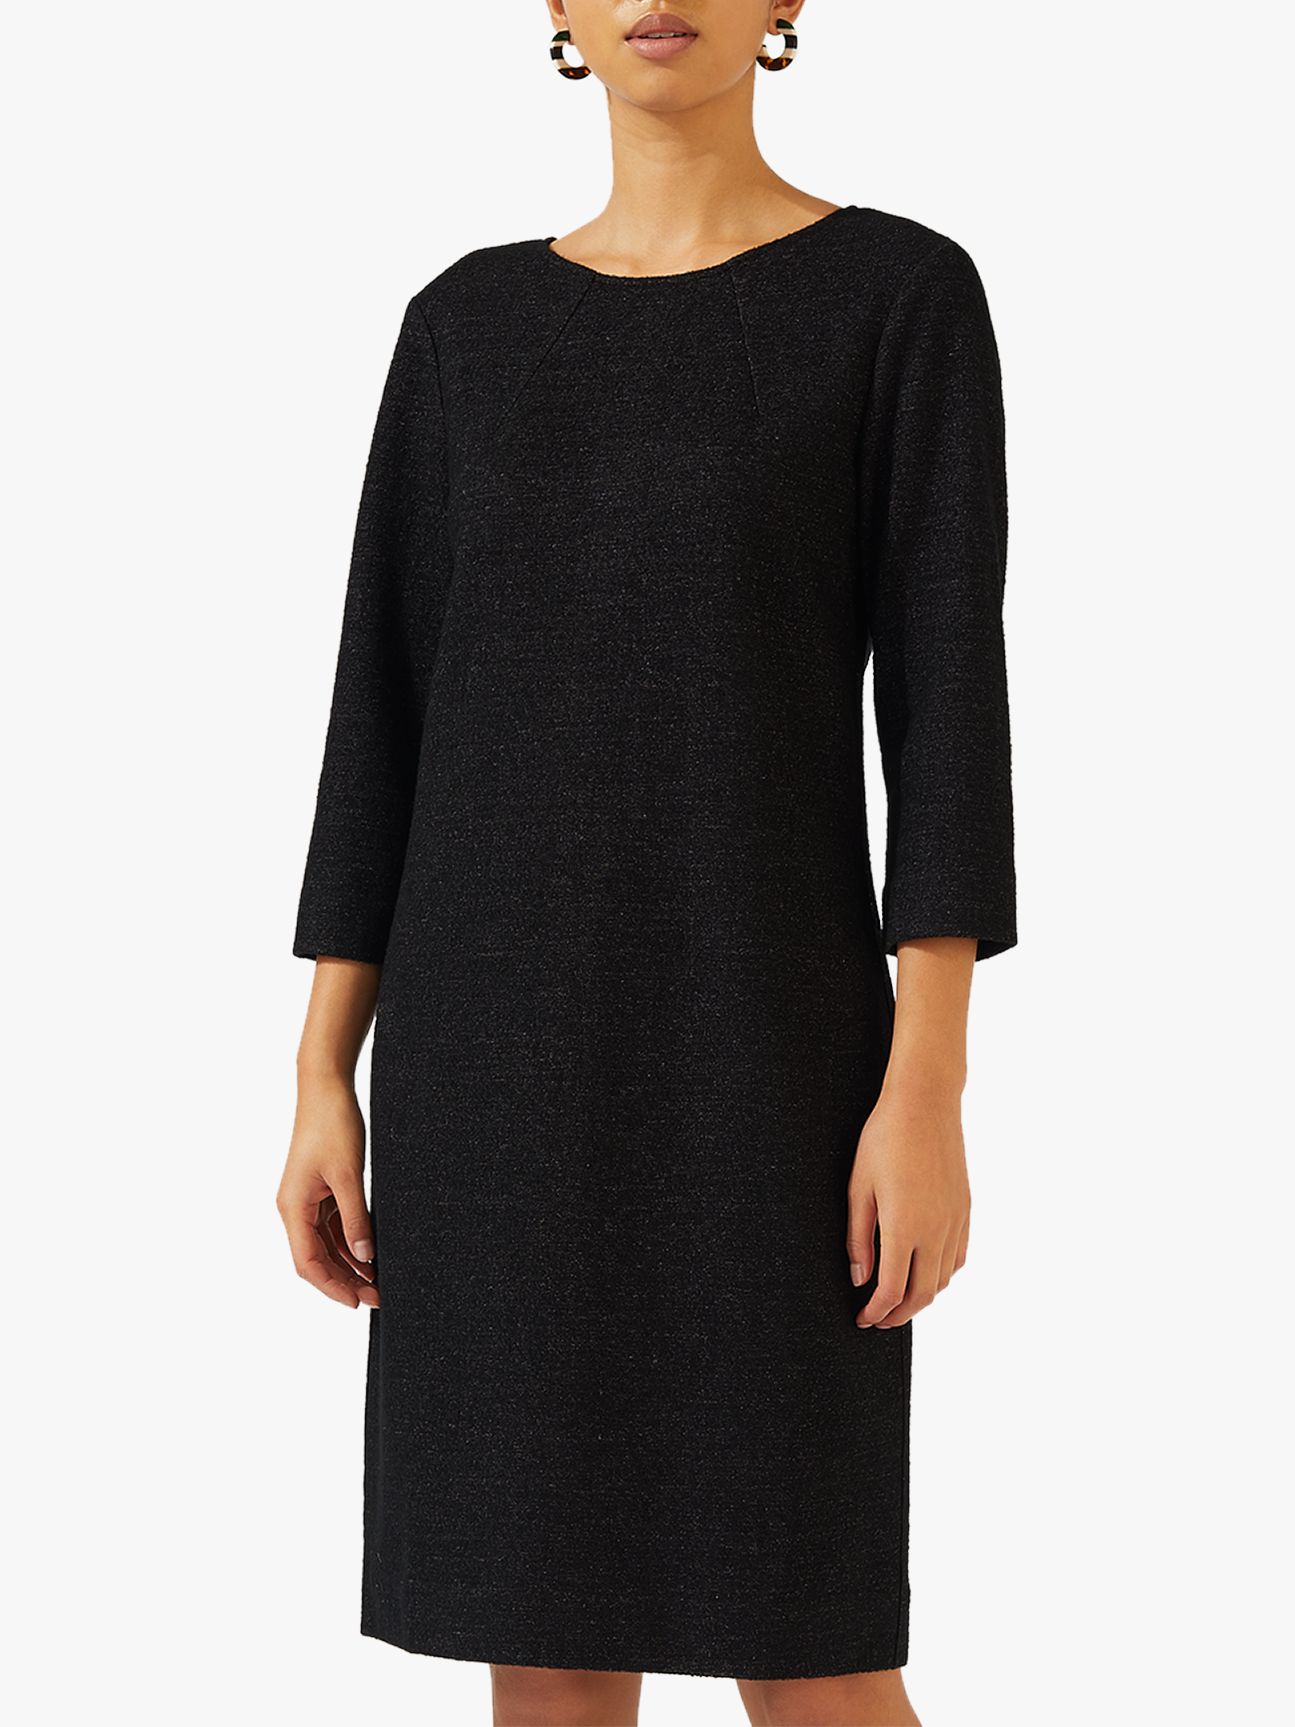 Jigsaw Speckled Knit Dress, Charcoal at John Lewis & Partners